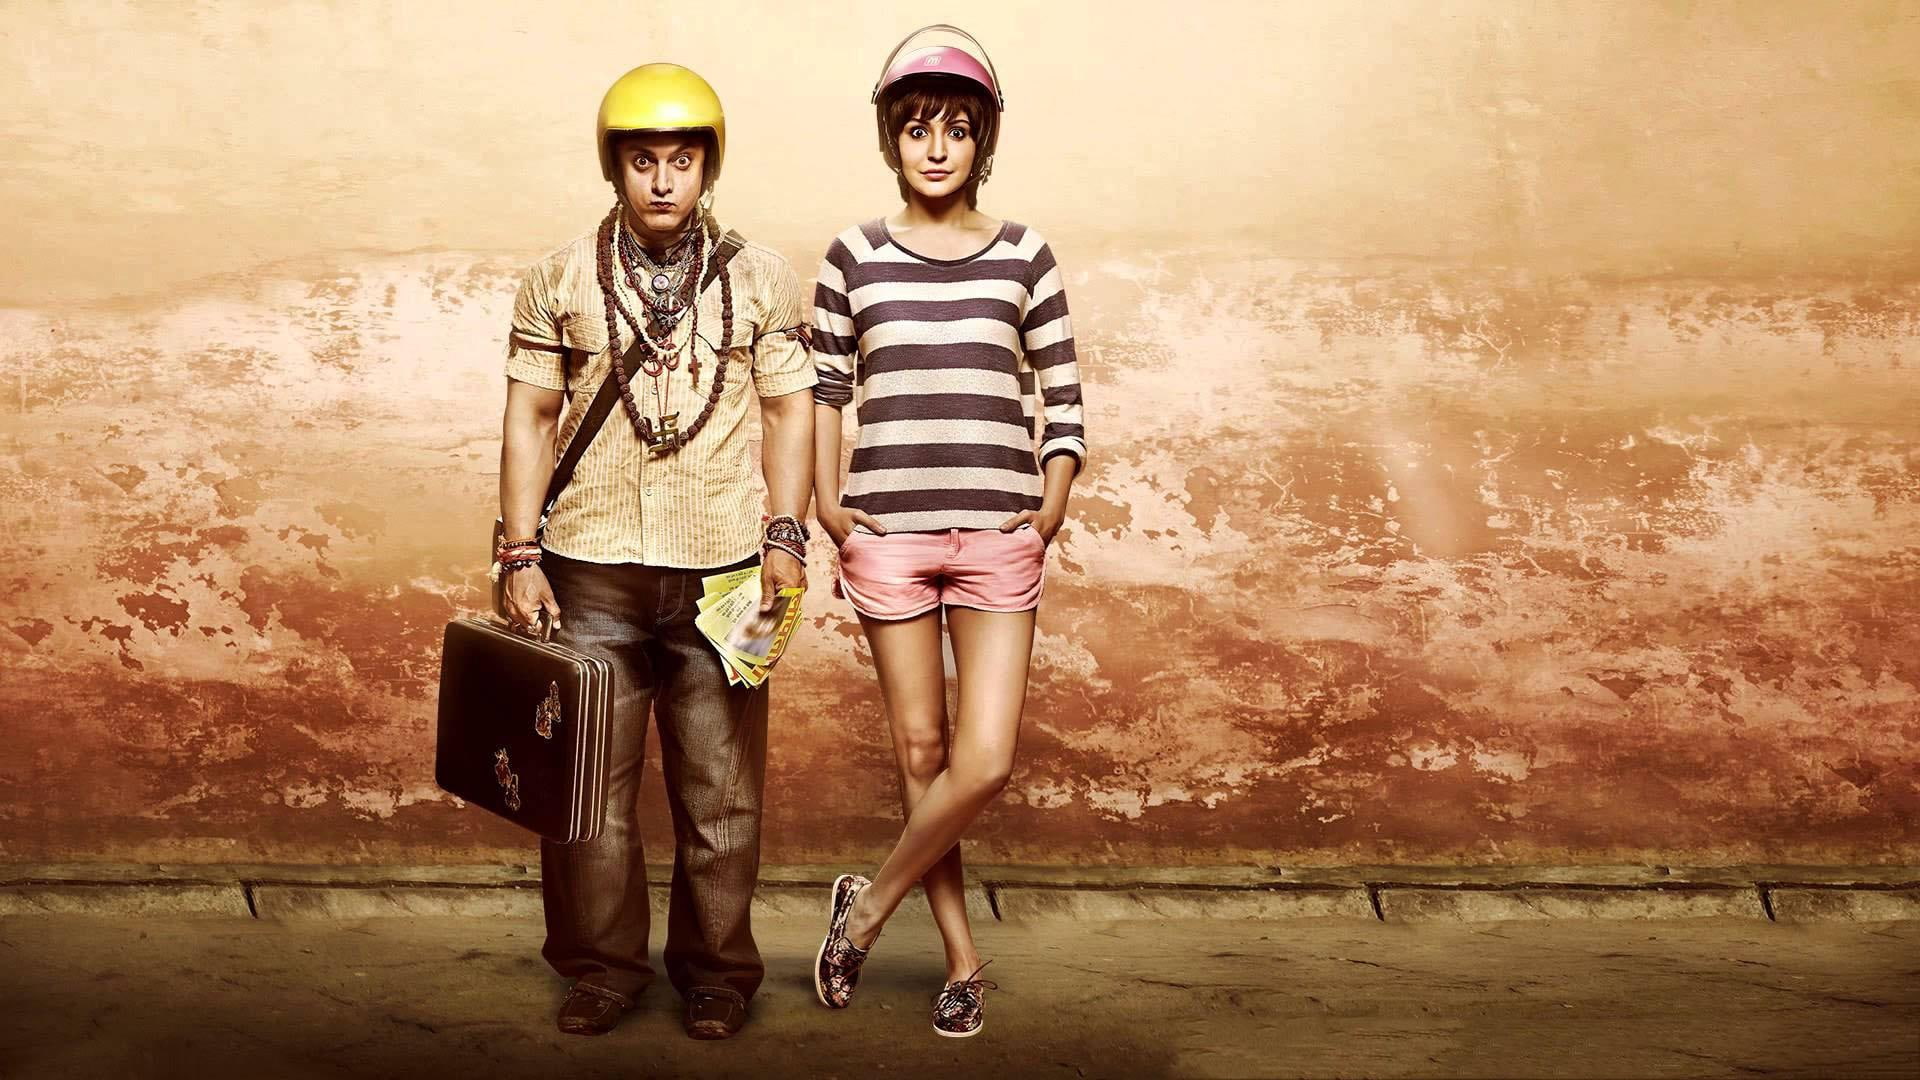 Anushka Sharma Aamir Khan PK Movie, man and woman standing behind the wall picture